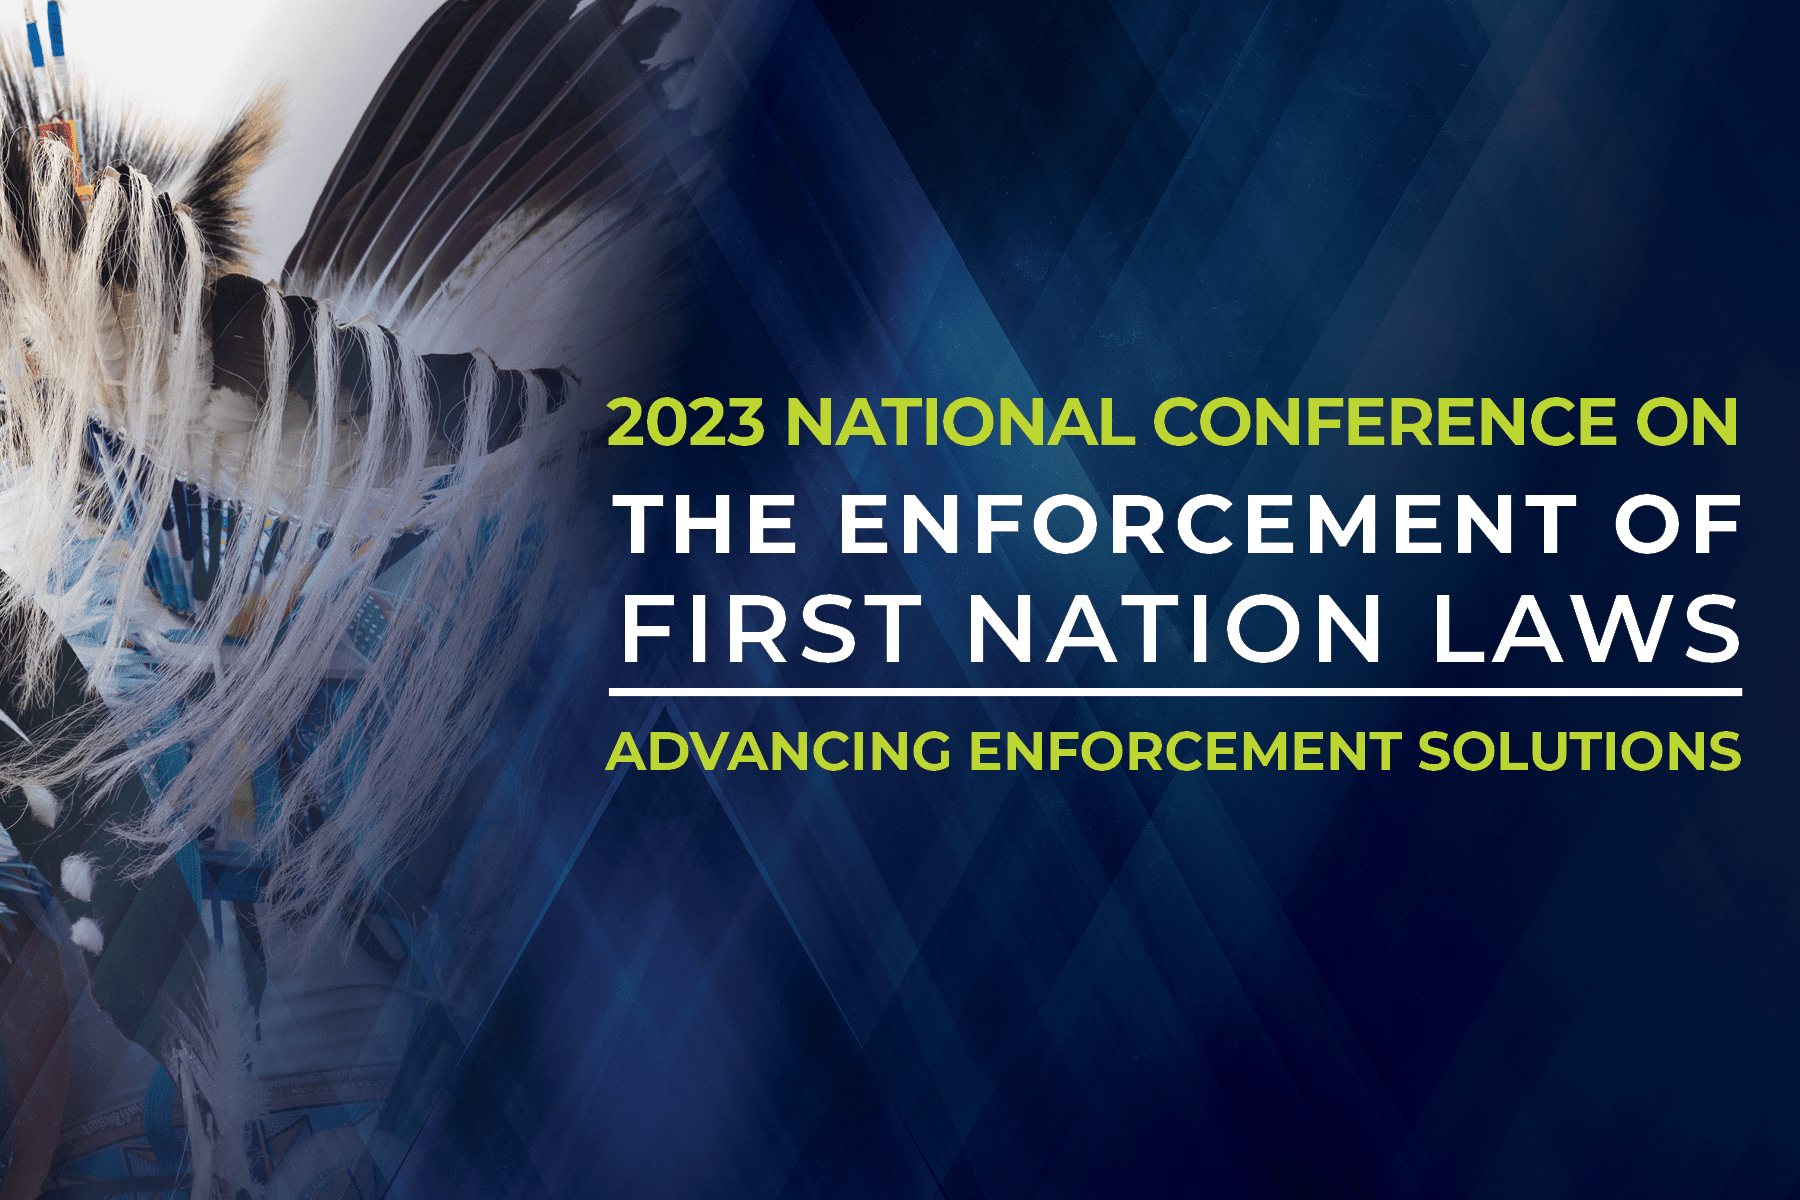 Graphic of 2023 National Conference on the enforcement of First Nation Law to be held on June 6, 7, and 8, 2023.